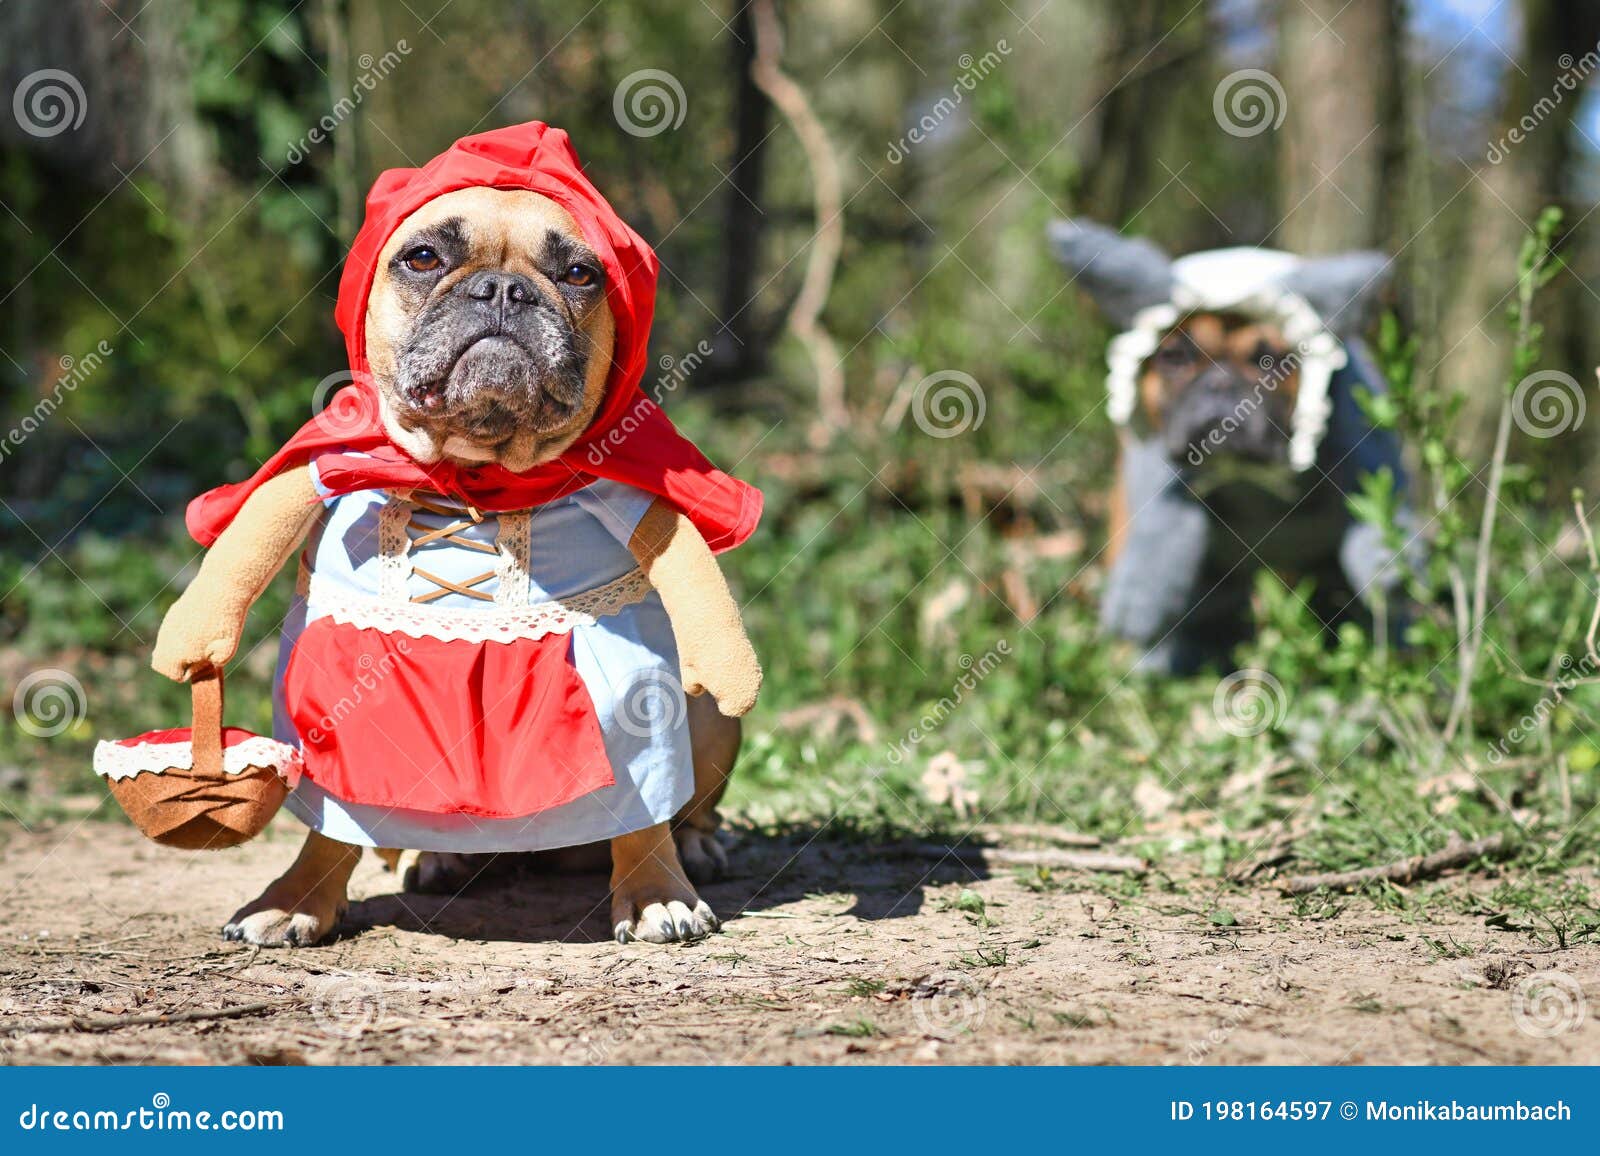 funny  french bulldog dogs dressed up with halloween costume as fairytale character little red riding hood and bad wolf